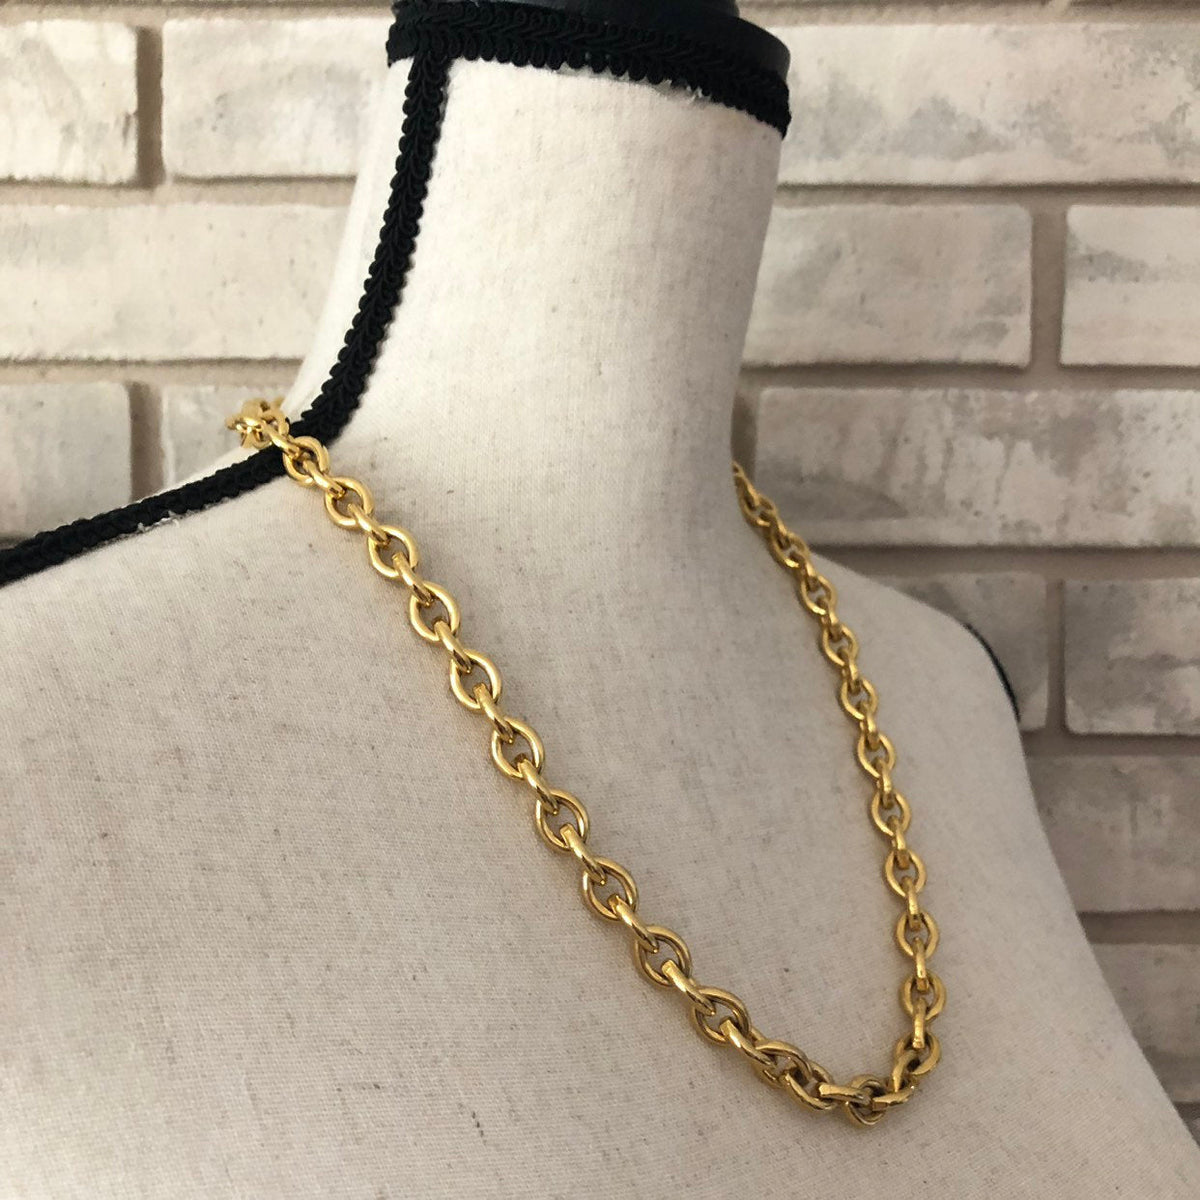 Anne Klein Classic Heavy Link Gold Chain Necklace - 24 Wishes Vintage Jewelry